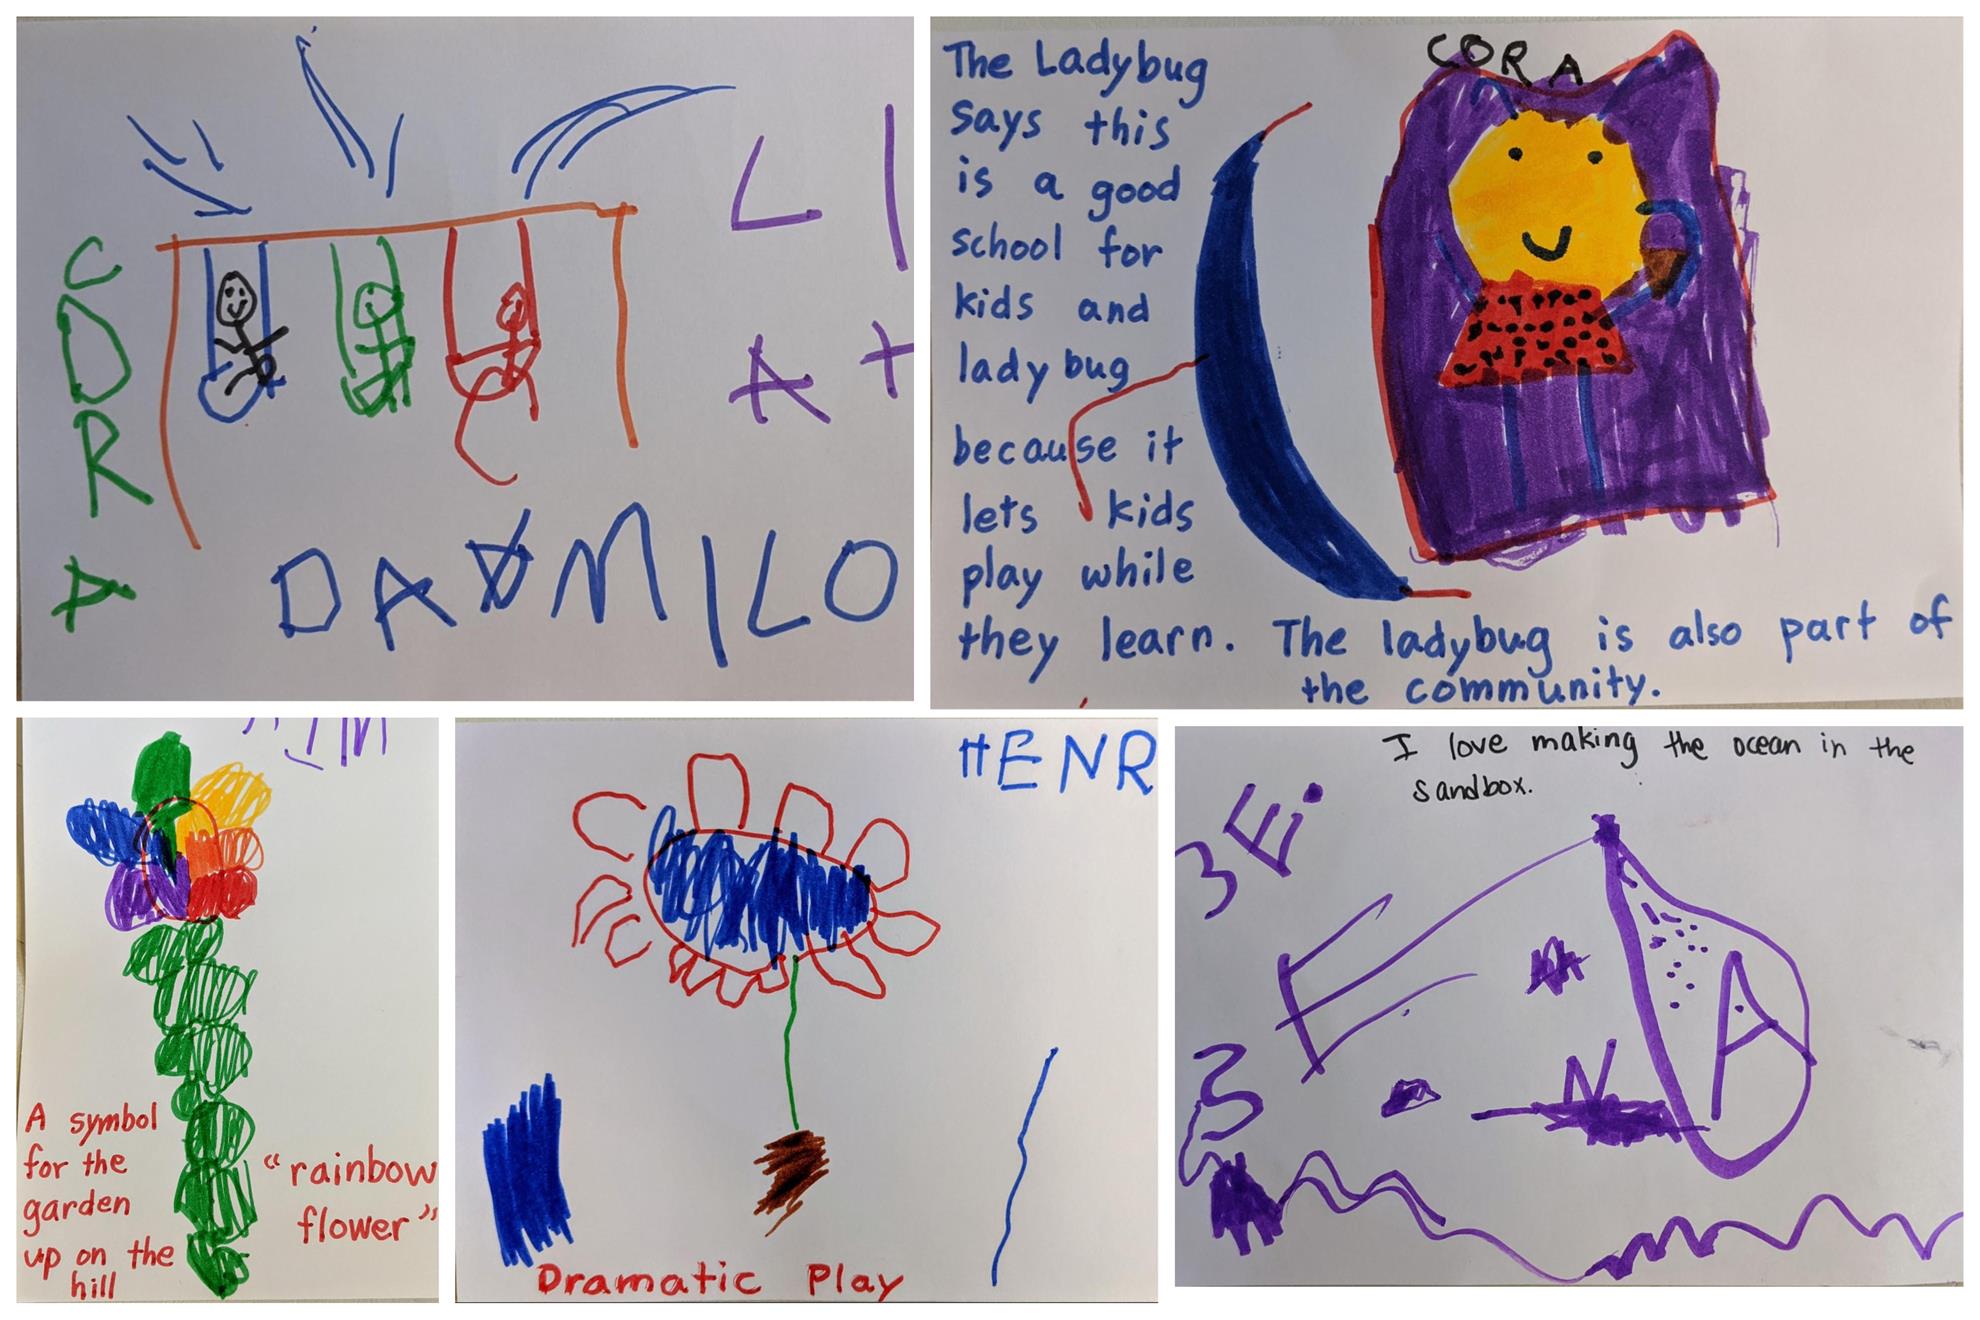 Drawings done by students during the KIBO unit